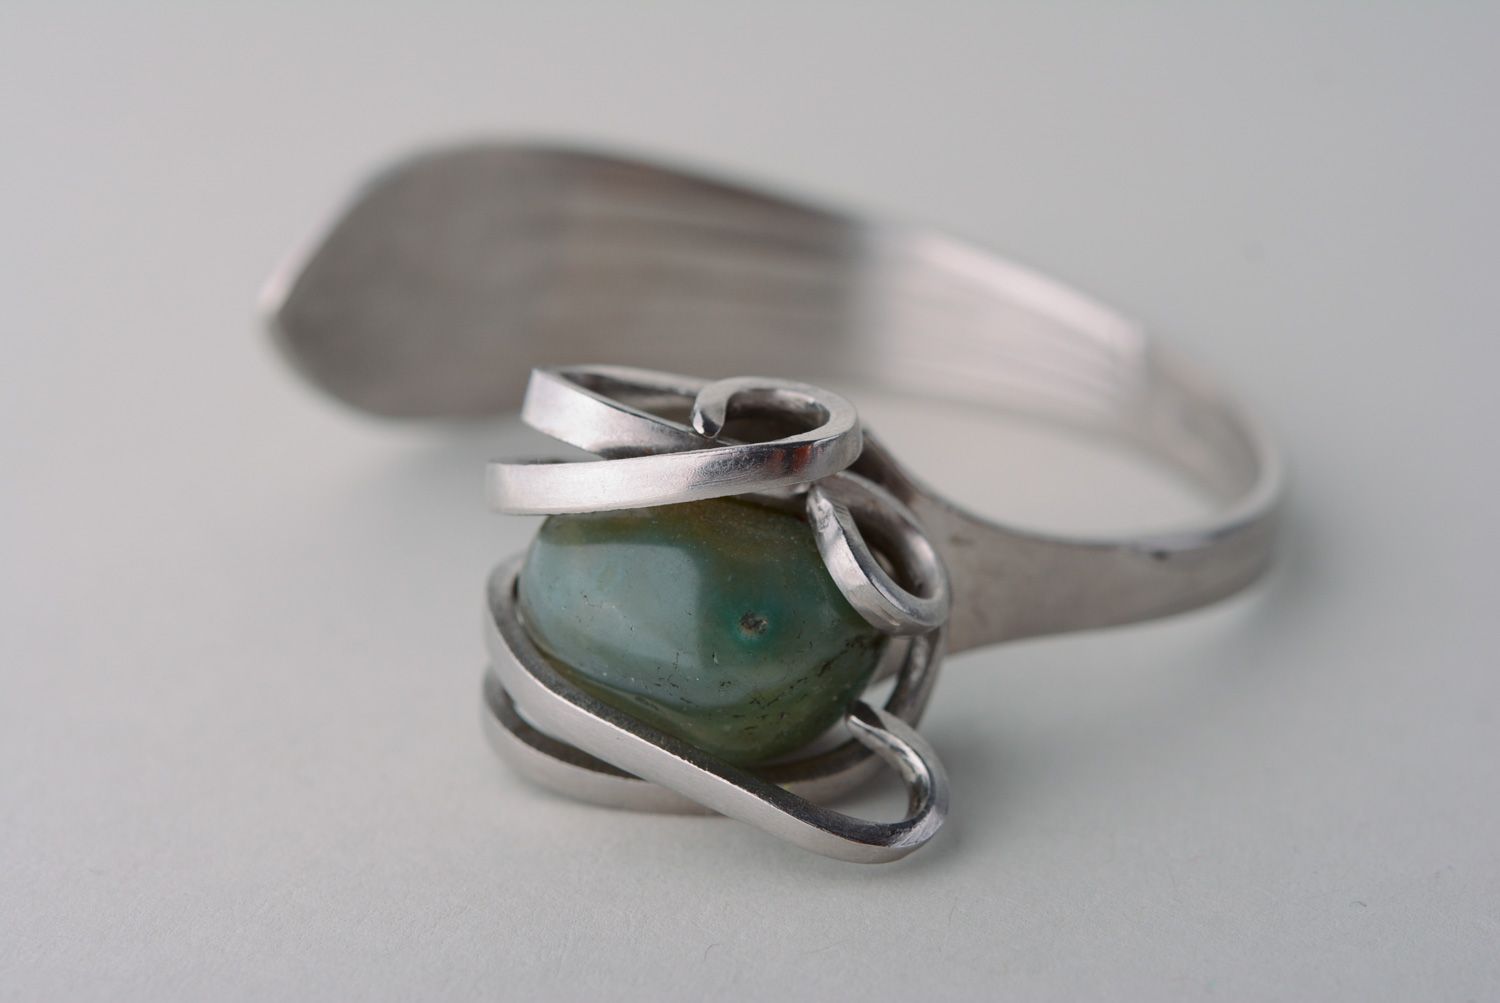 Homemade metal fork bracelet with green stone photo 2